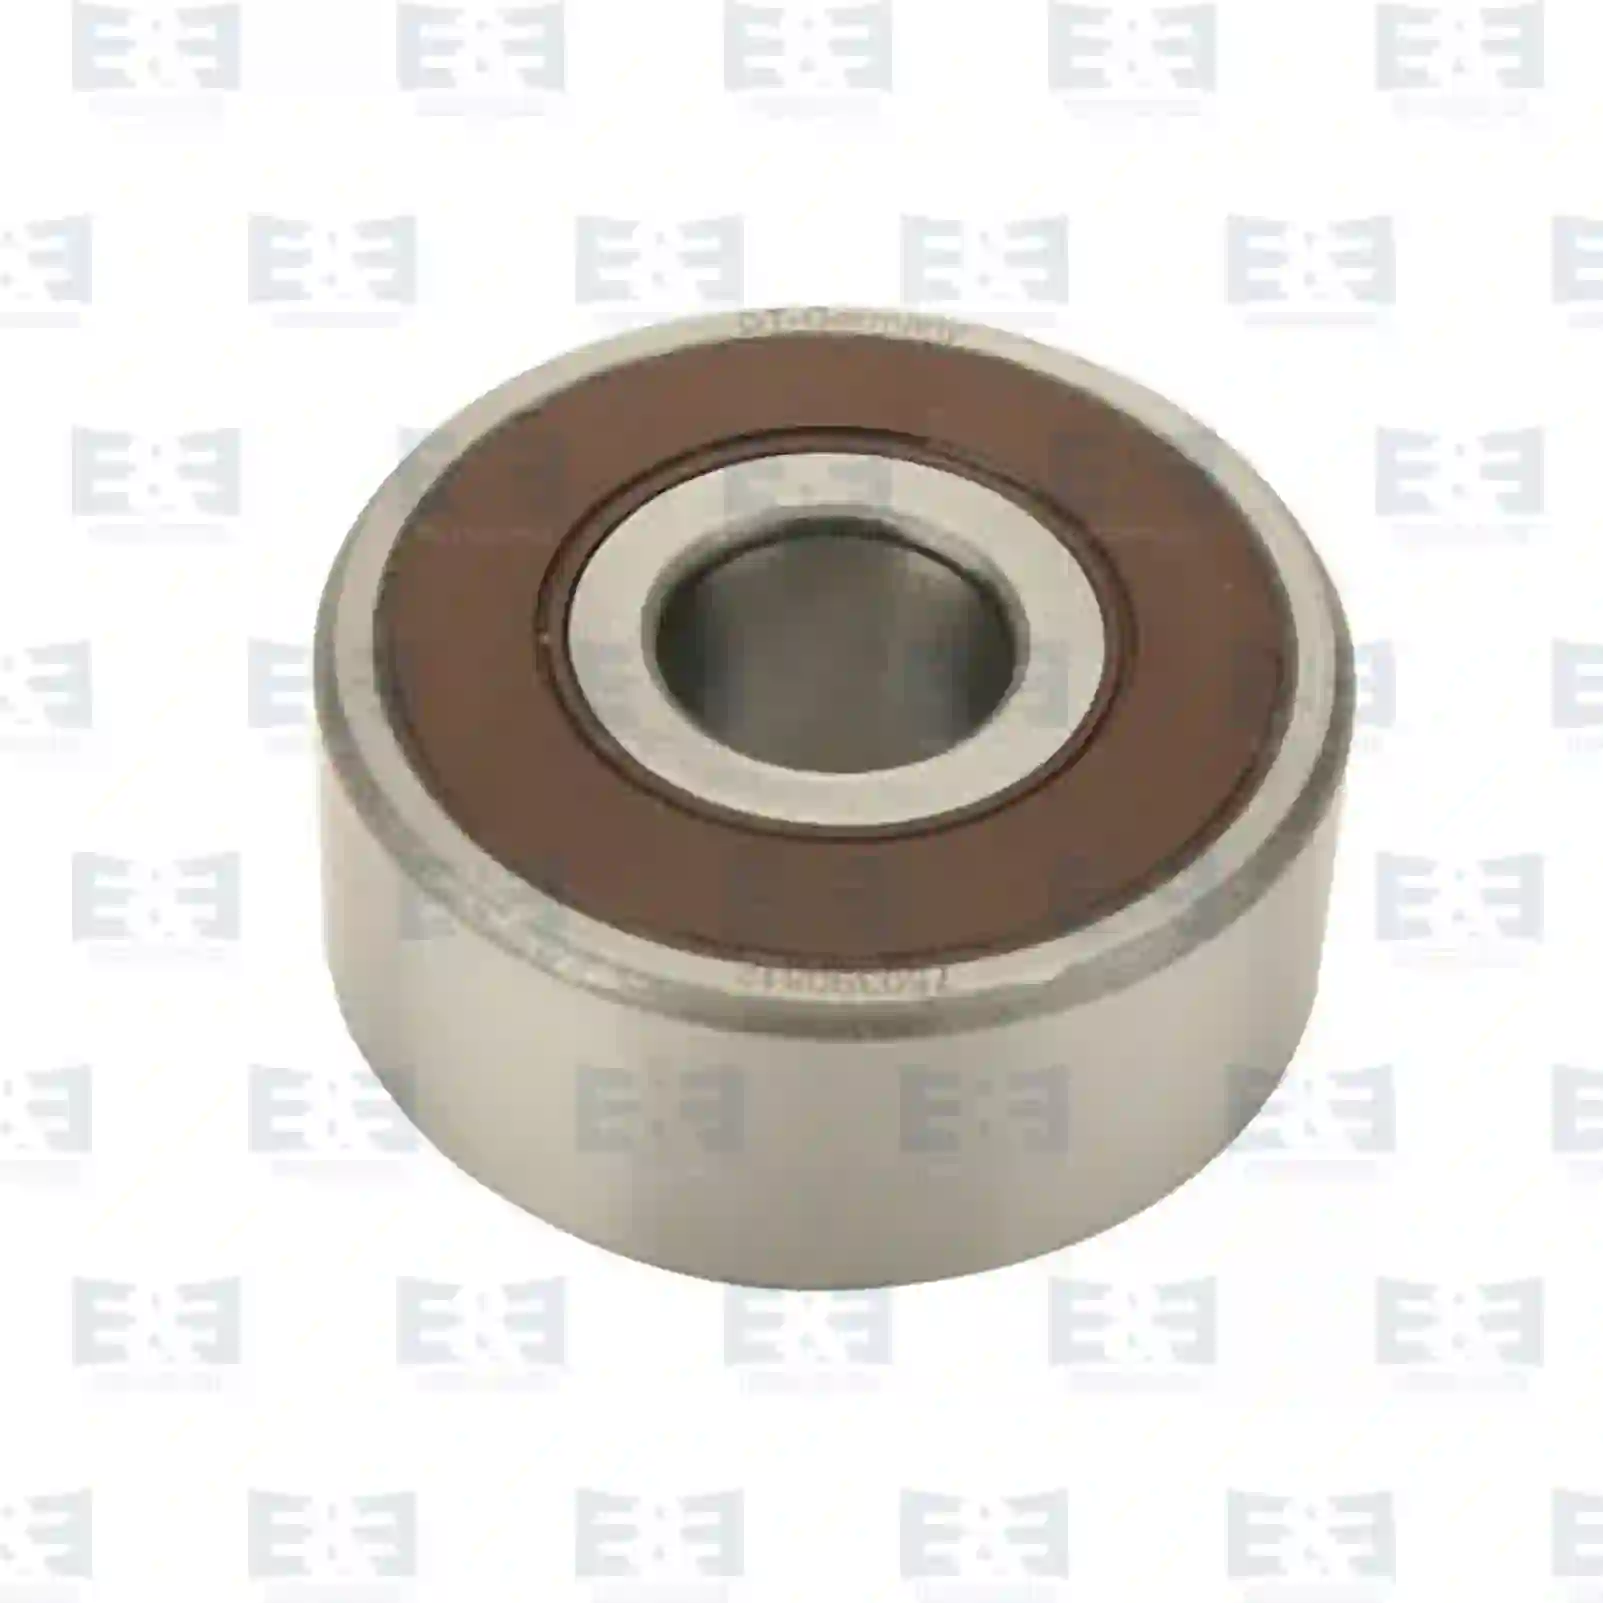  Ball bearing || E&E Truck Spare Parts | Truck Spare Parts, Auotomotive Spare Parts